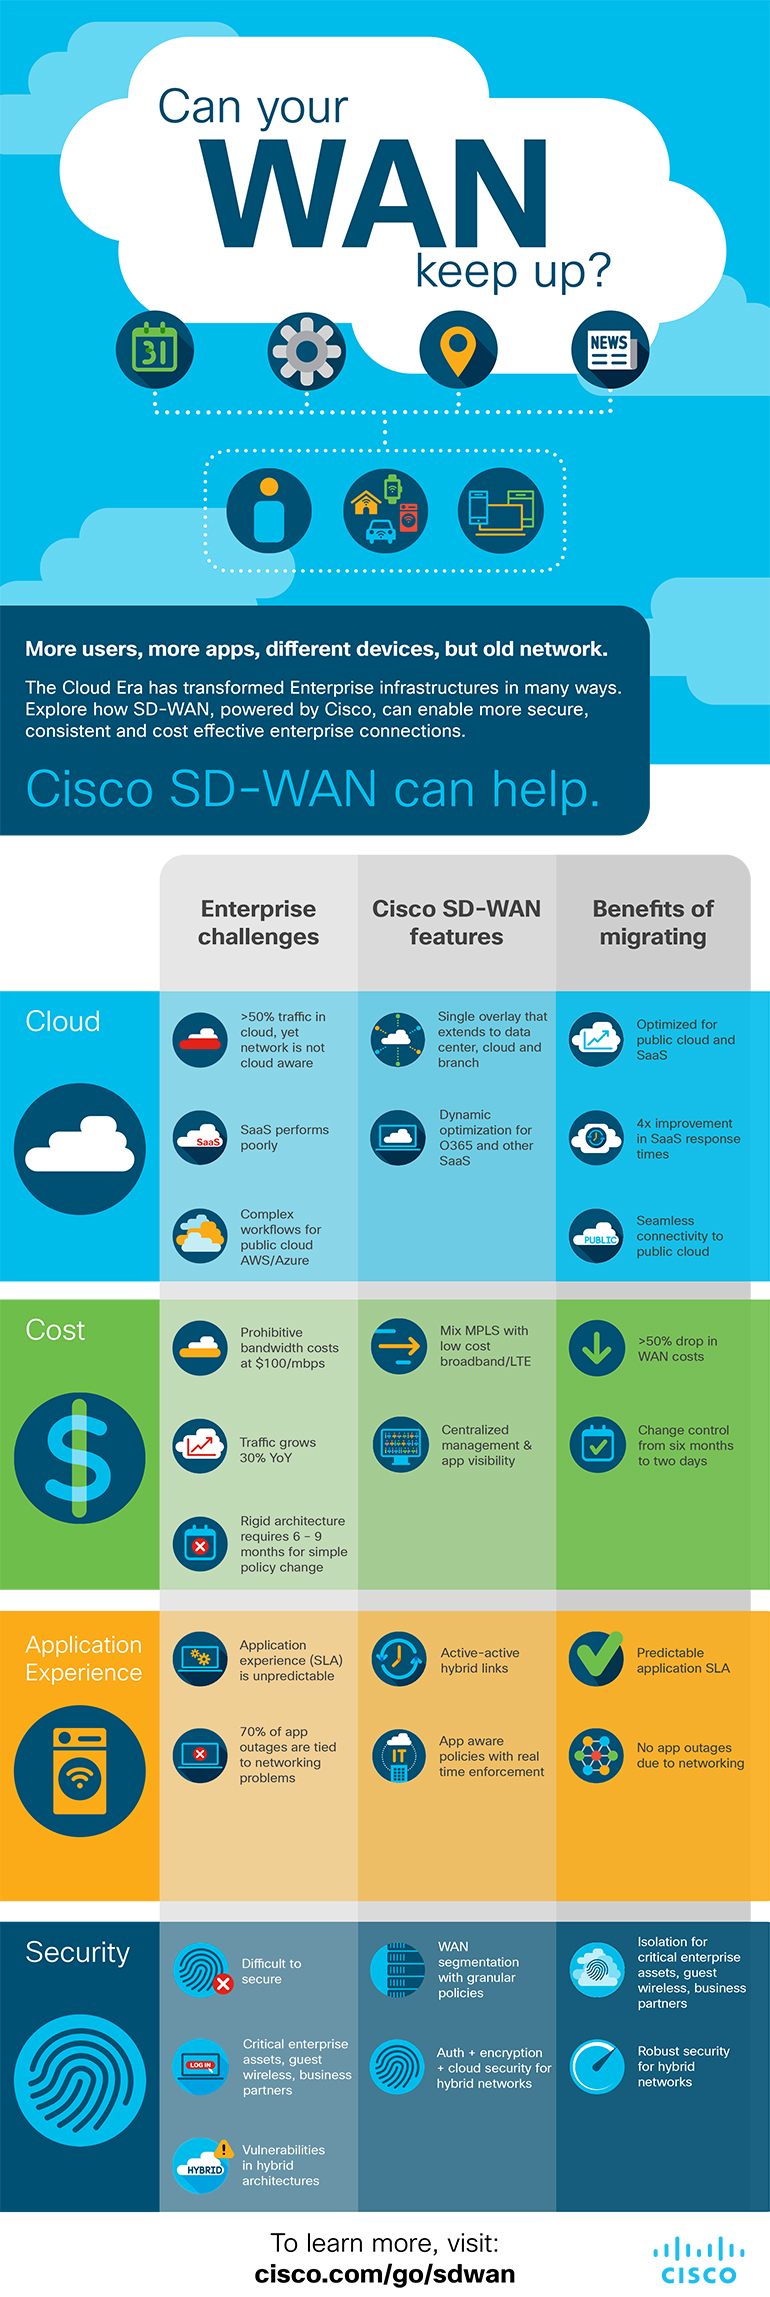 Article Can Your WAN Keep Up? Image